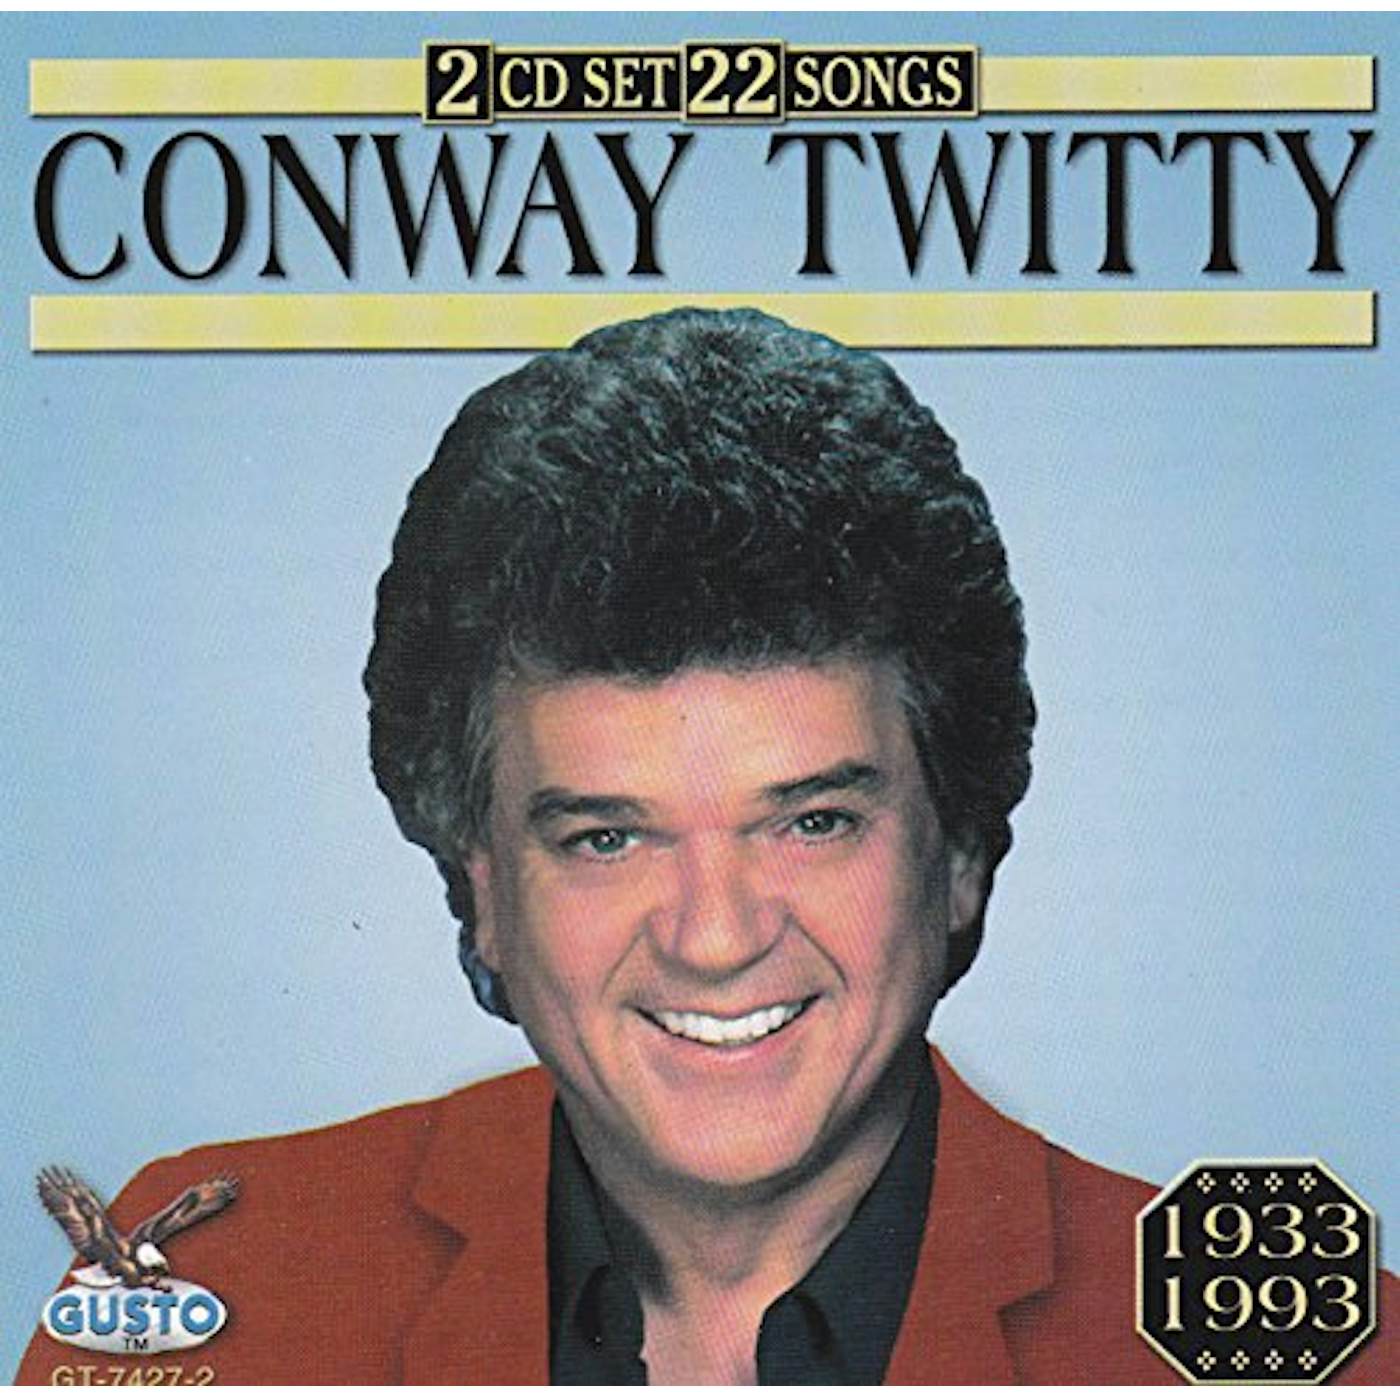 Conway Twitty 22 SONGS CD